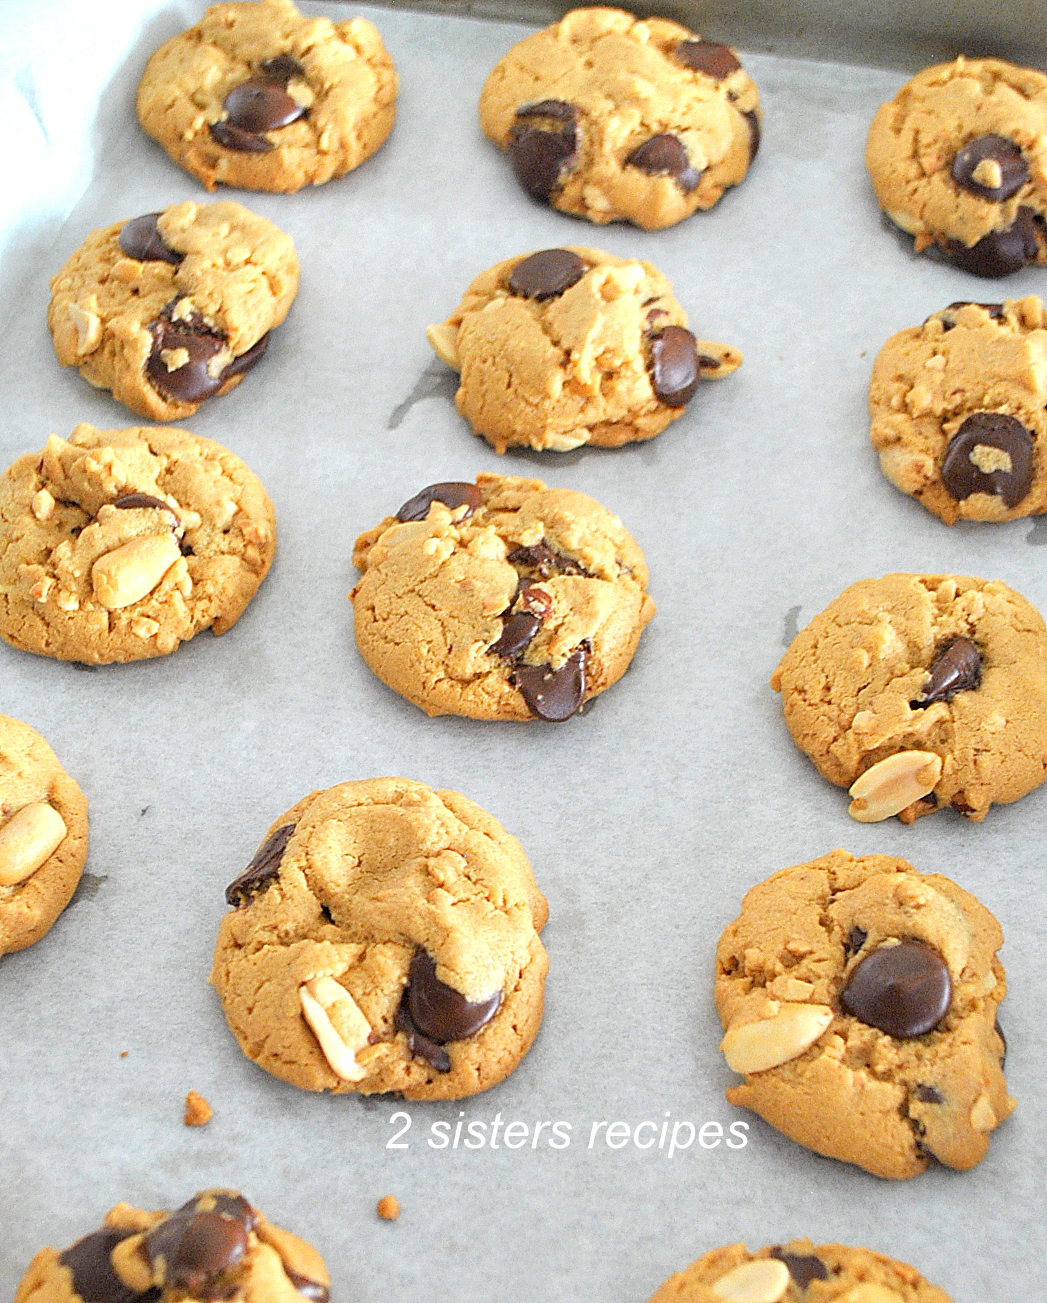 Gluten-Free Peanut Butter Chocolate Chip Cookies by 2sistersrecipes.com